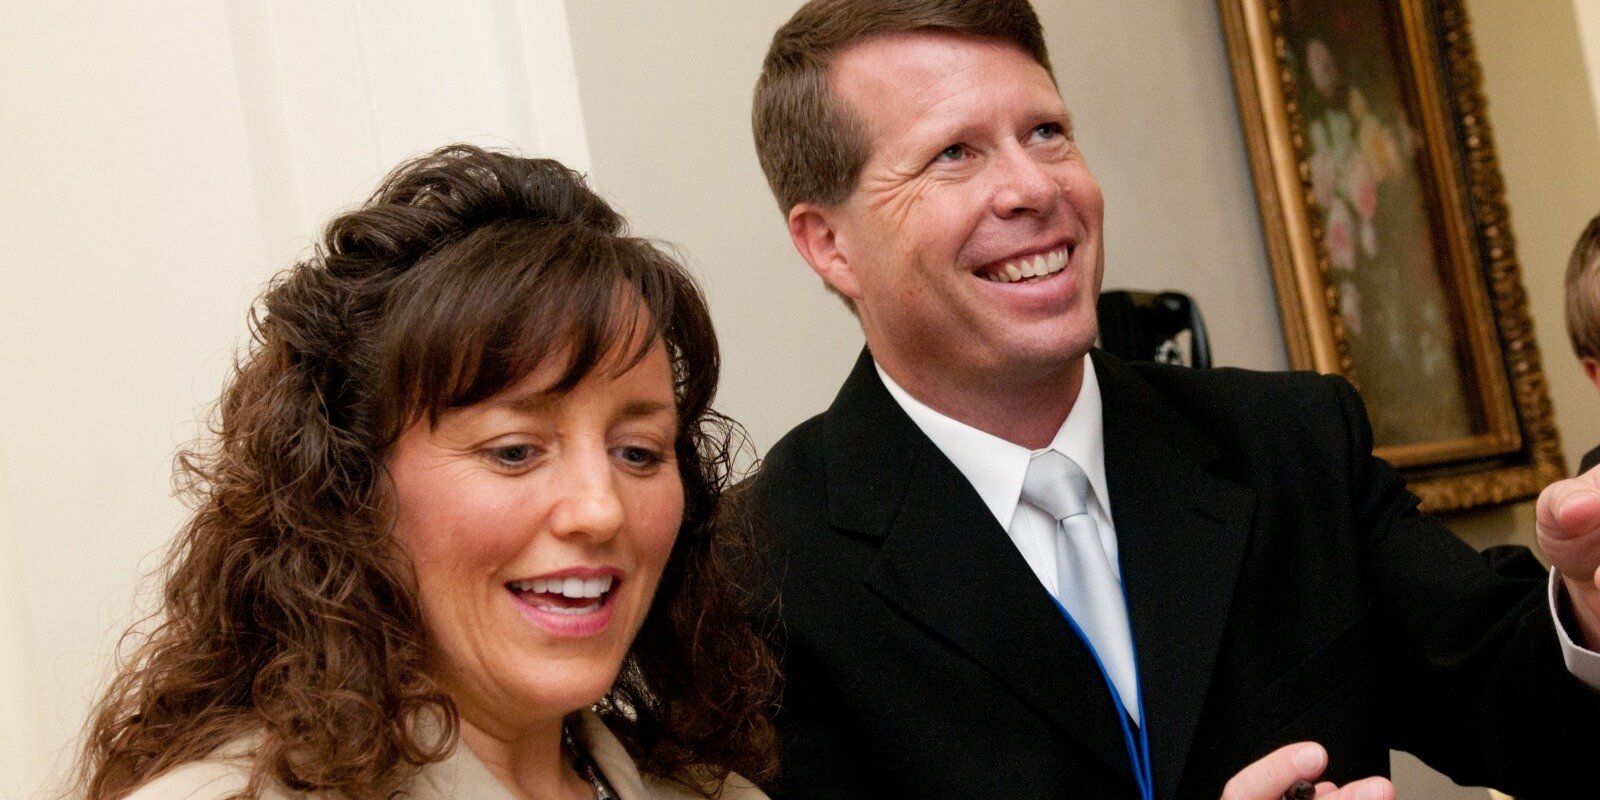 Michelle Duggar and Jim Bob Duggar sign a copy of their book during a book signing during the 5th Annual Values Voter Summit at the Omni Shoreham Hotel on September 17, 2010 in Washington, DC.